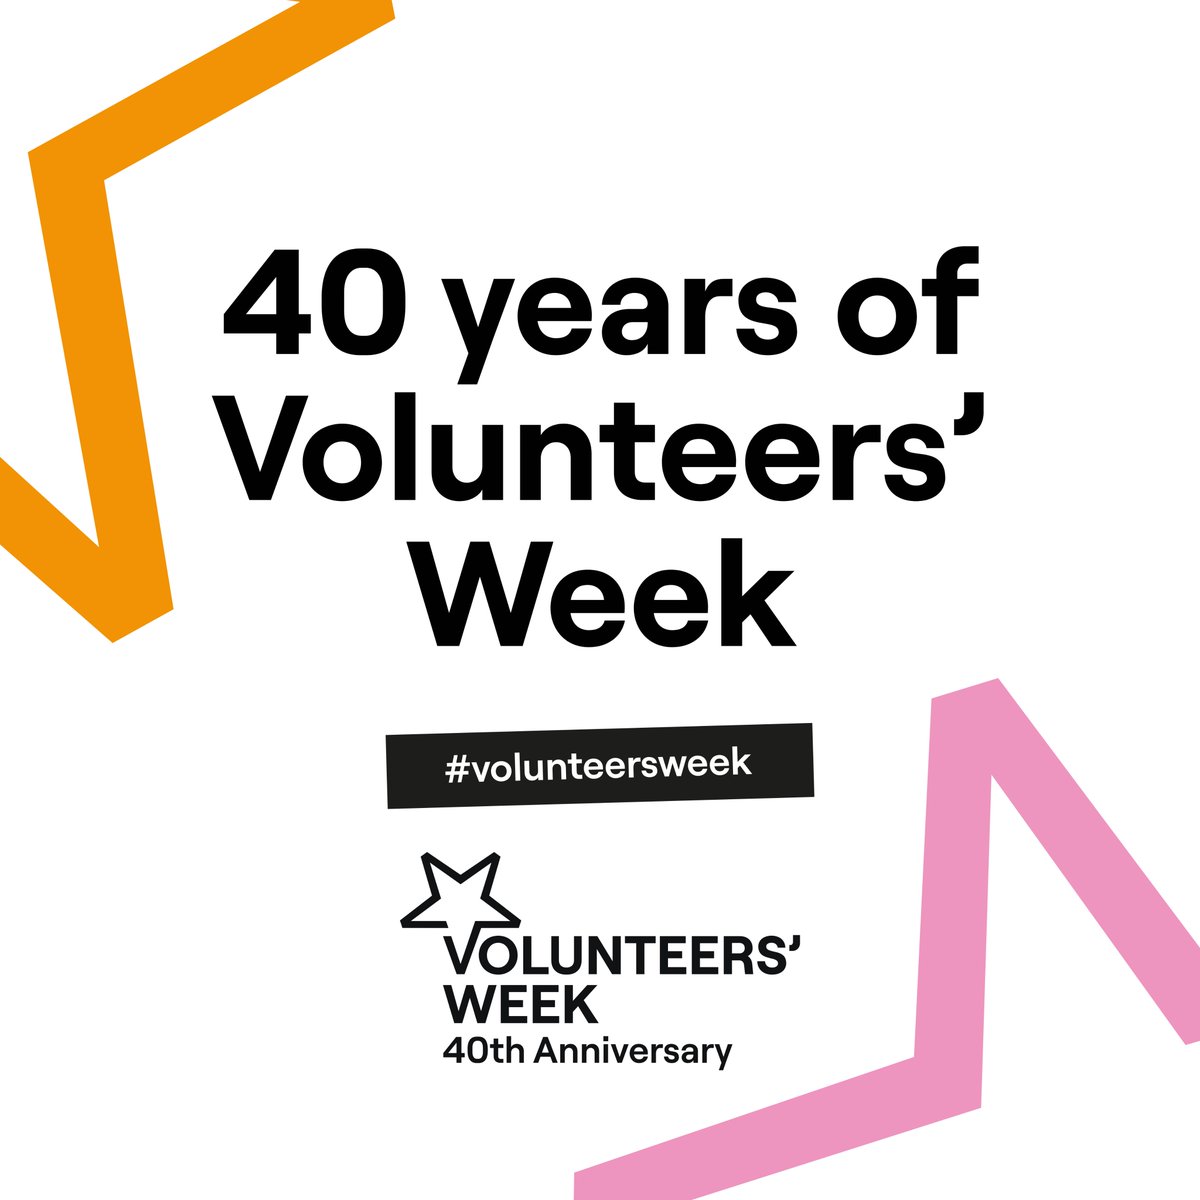 #Volunteerweek🎉celebrates the fantastic contributions volunteers make across the UK. This Volunteer Week, let's recognise and applaud 👏👏 all our amazing volunteers for the vital role they play in supporting our local heritage community. #thanet